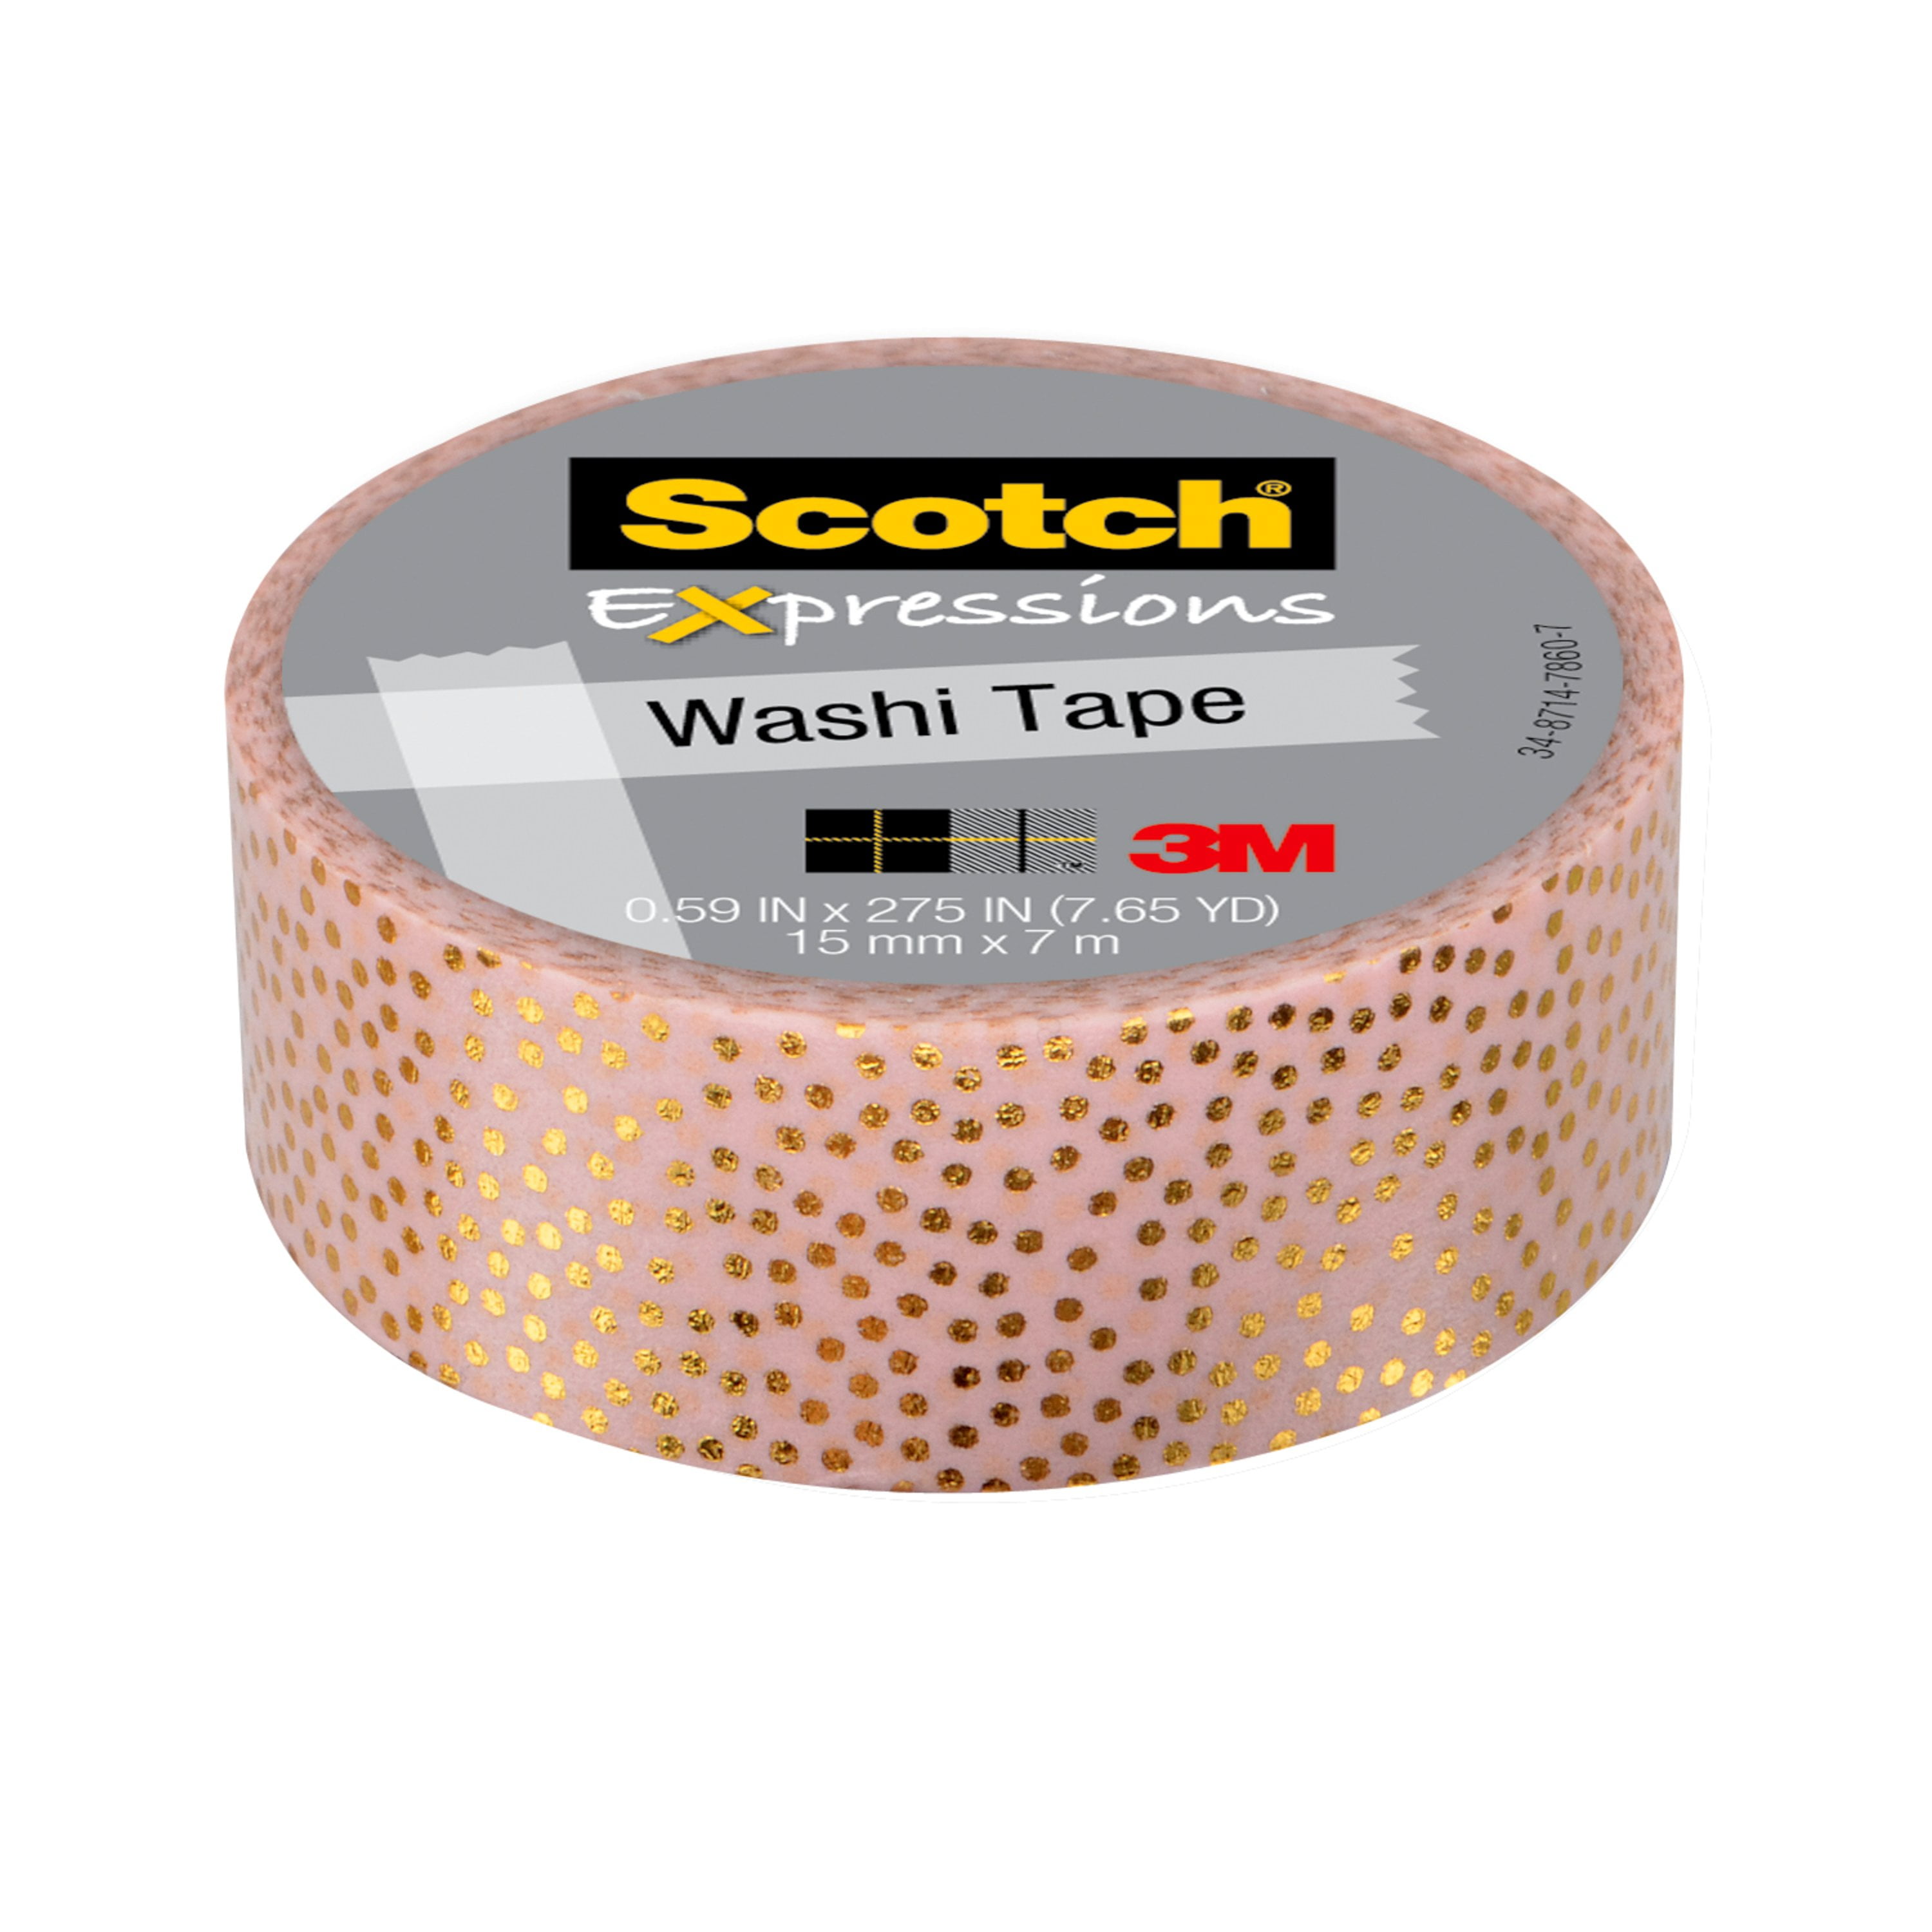 Syntego Solid Foil Washi Tape Decorative Self Adhesive Masking Tape 15mm x 10 Meters (Gold)